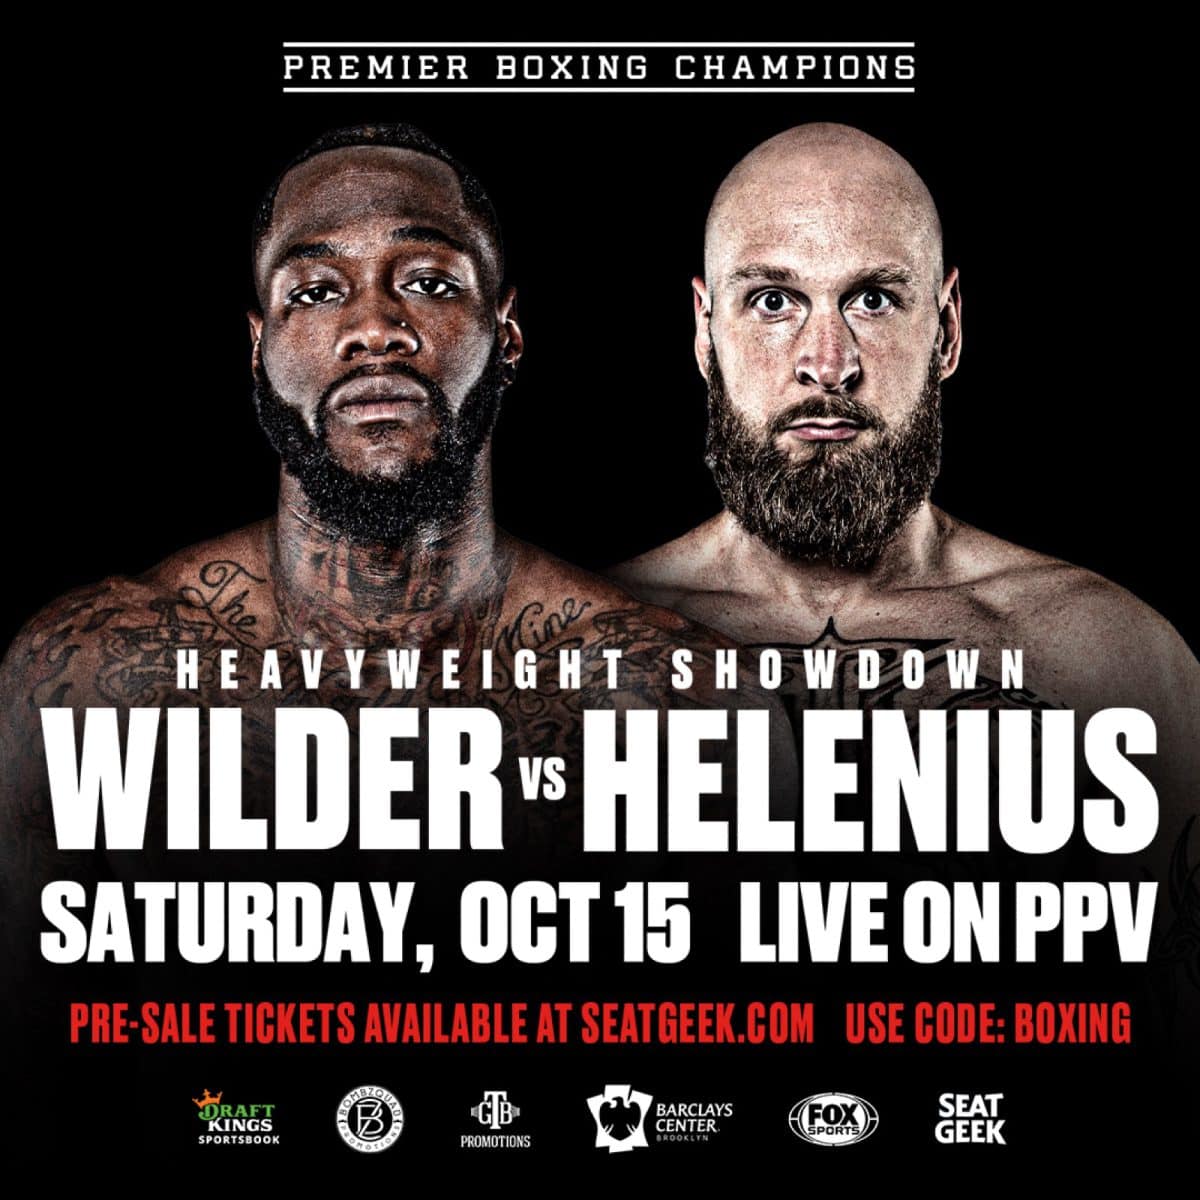 Image: Deontay Wilder takes on Robert Helenius on FOX PPV on Oct.15th